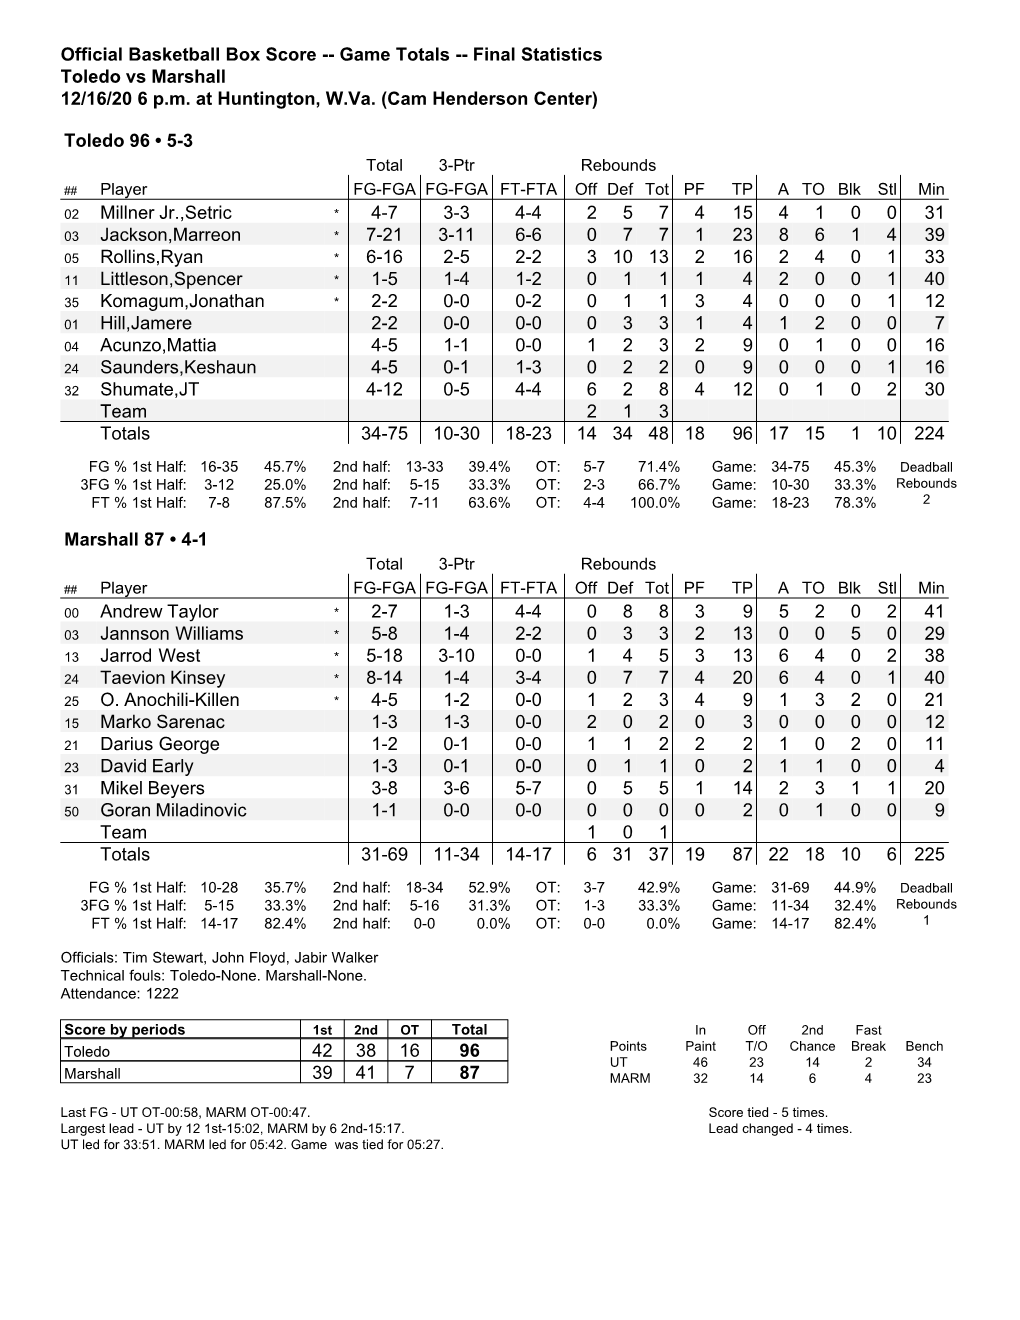 Official Basketball Box Score -- Game Totals -- Final Statistics Toledo Vs Marshall 12/16/20 6 P.M